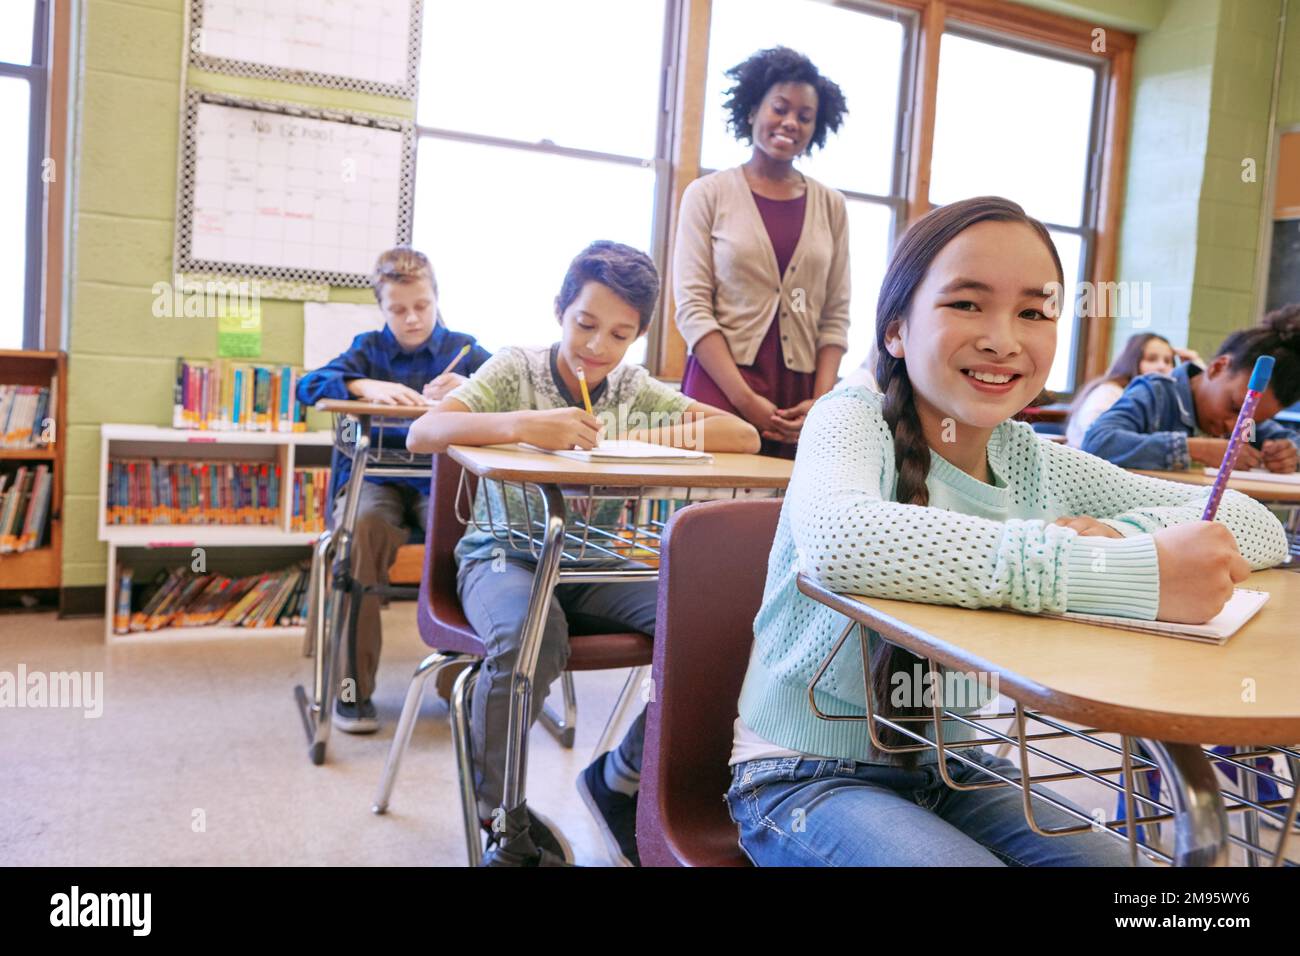 Education, exam and portrait of a girl in class to study, writing and test at school. Happy, learning and student with a smile for studying in a Stock Photo